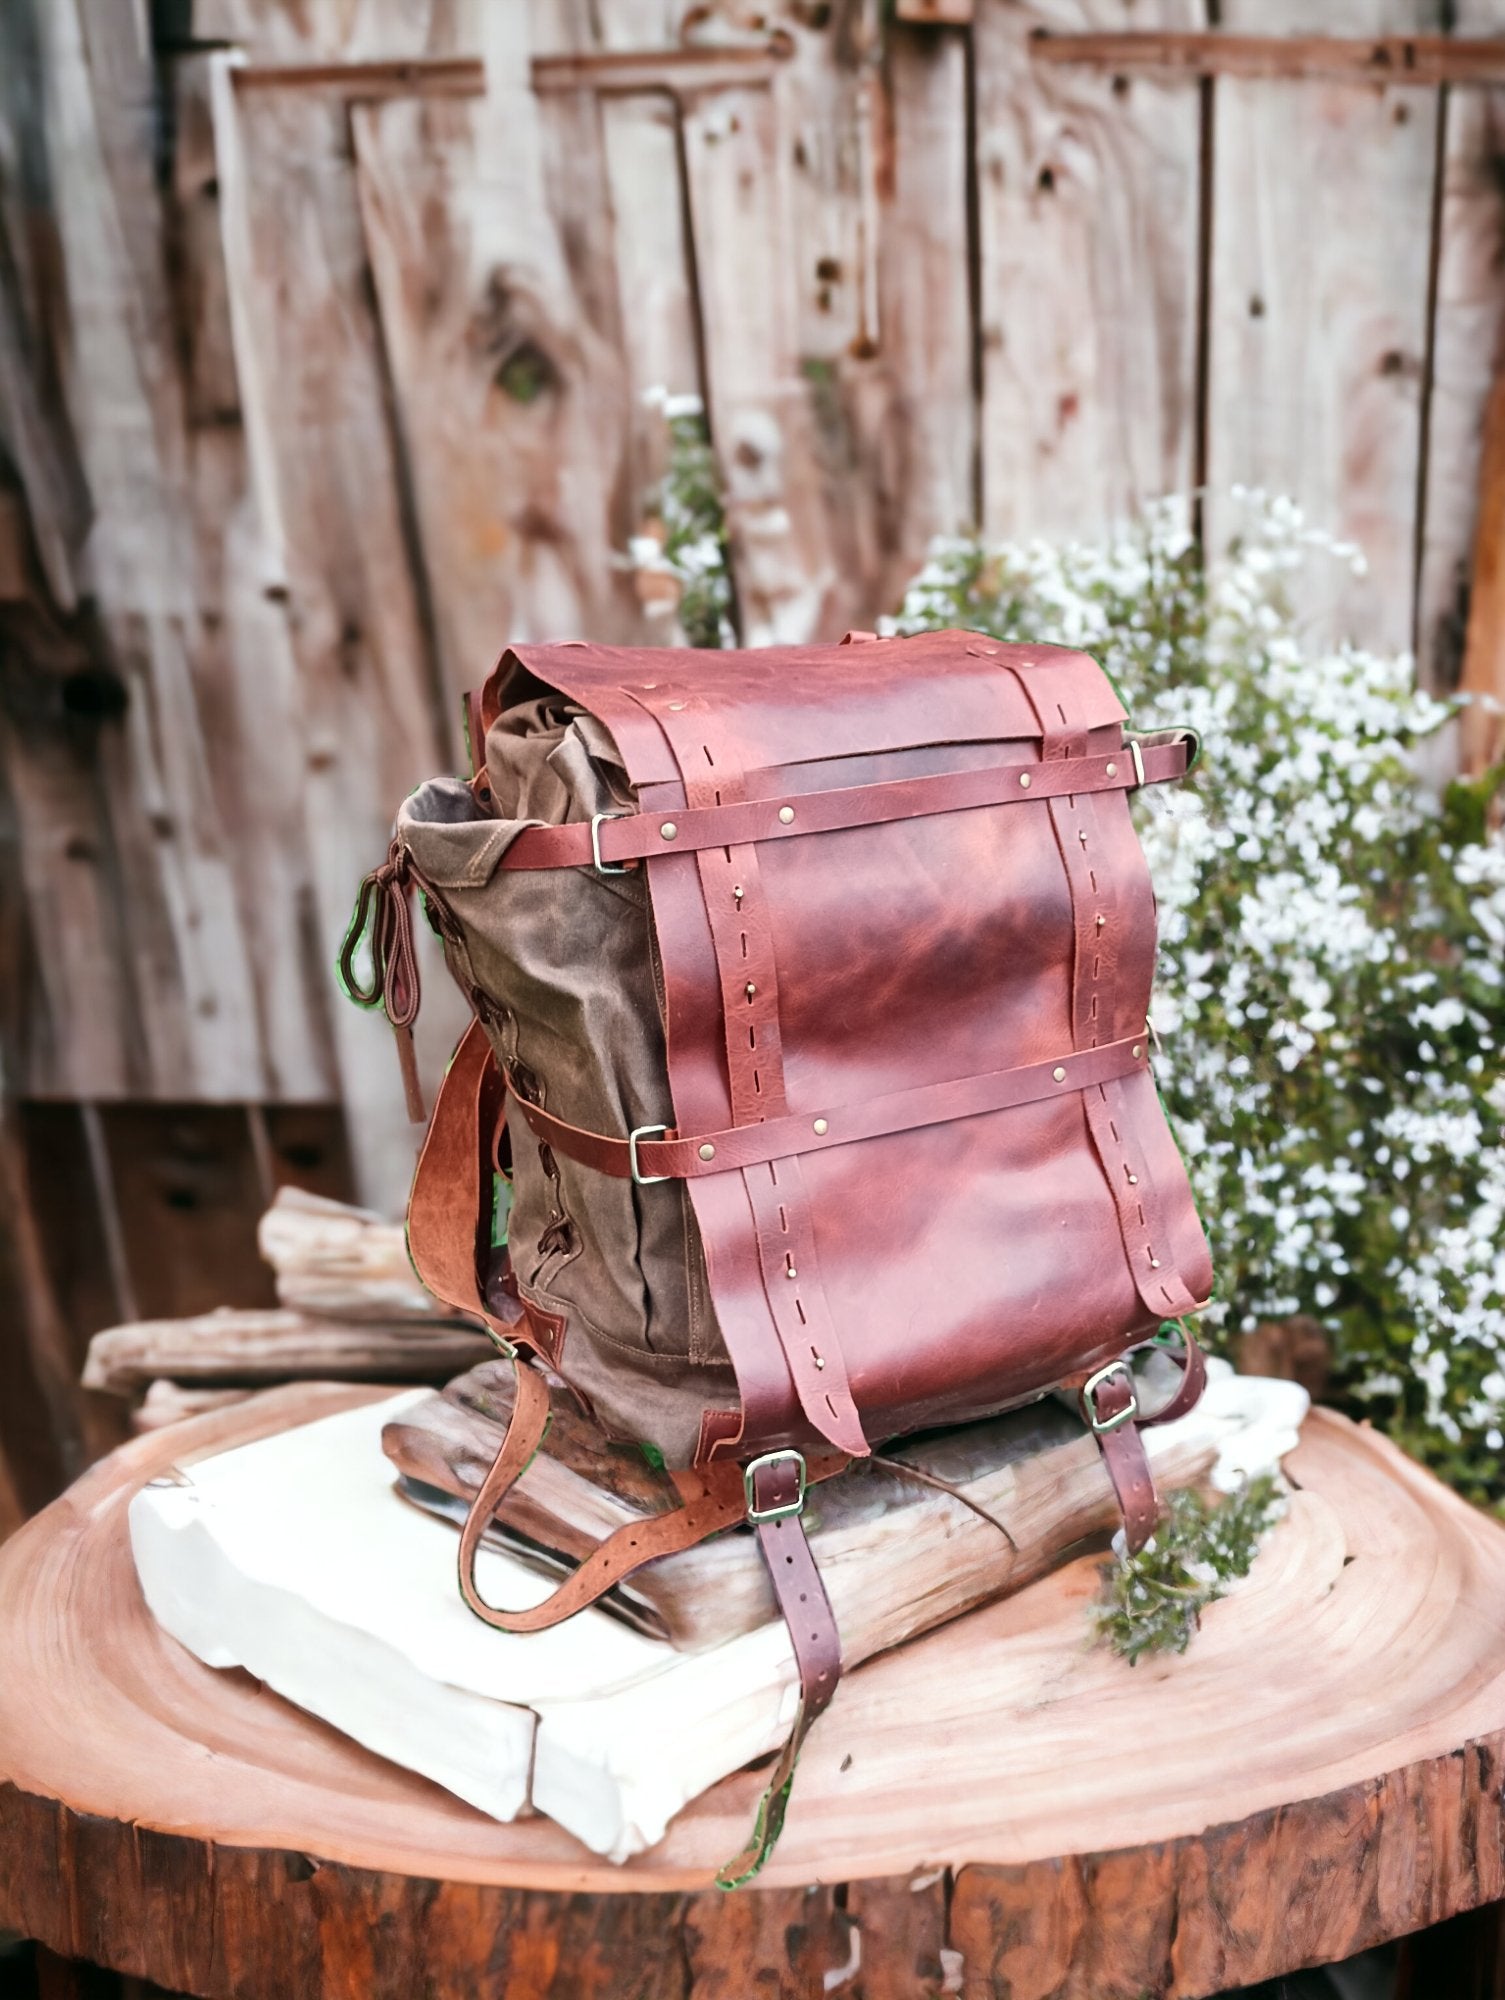 200USD Discount | Bushcraft Design Finalist | Handmade Leather and Canvas  Backpack for Travel, Camping,Military | 45 Liter | Personalization